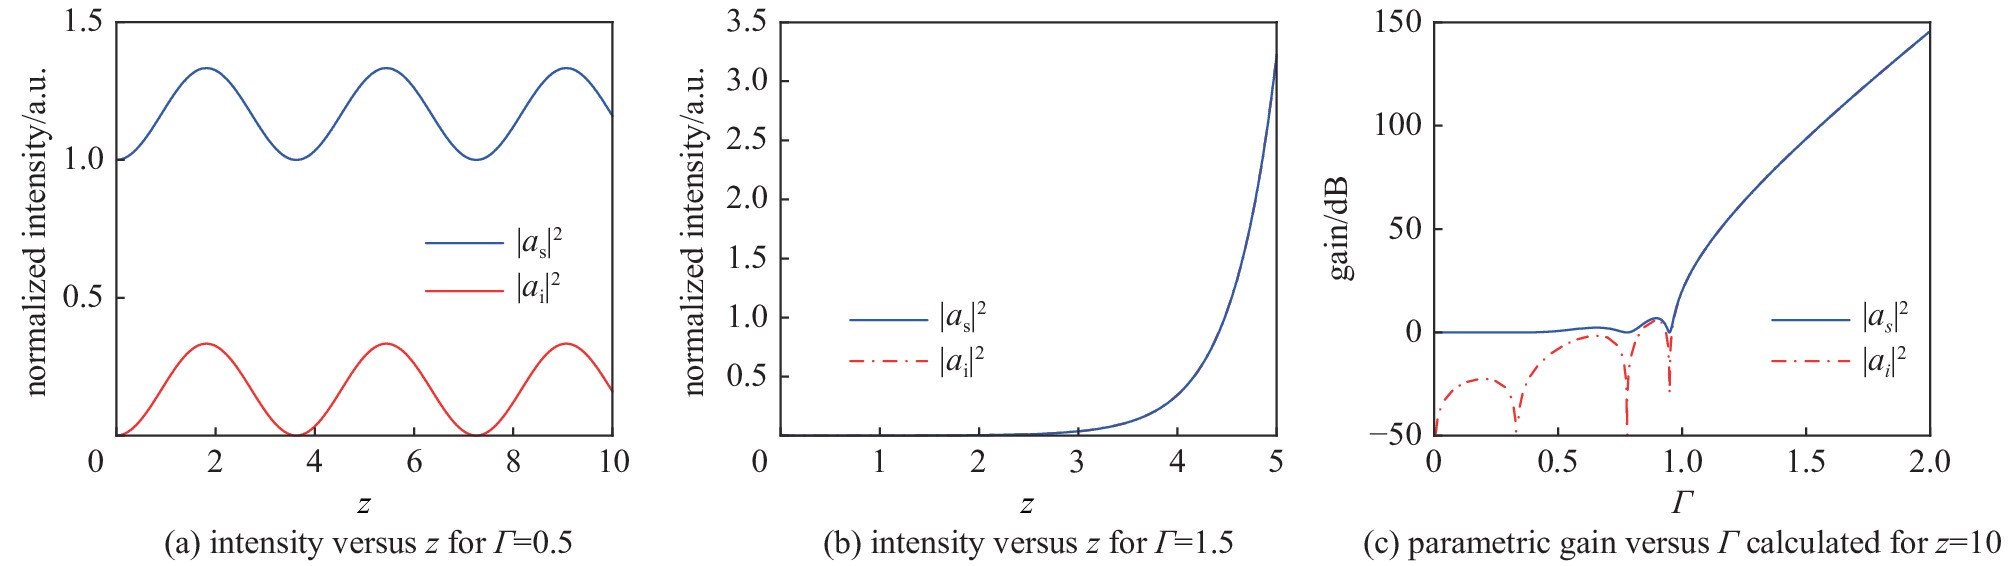 Intensity of signal (blue) and idler (red) versus z and Г for ∆k = 2